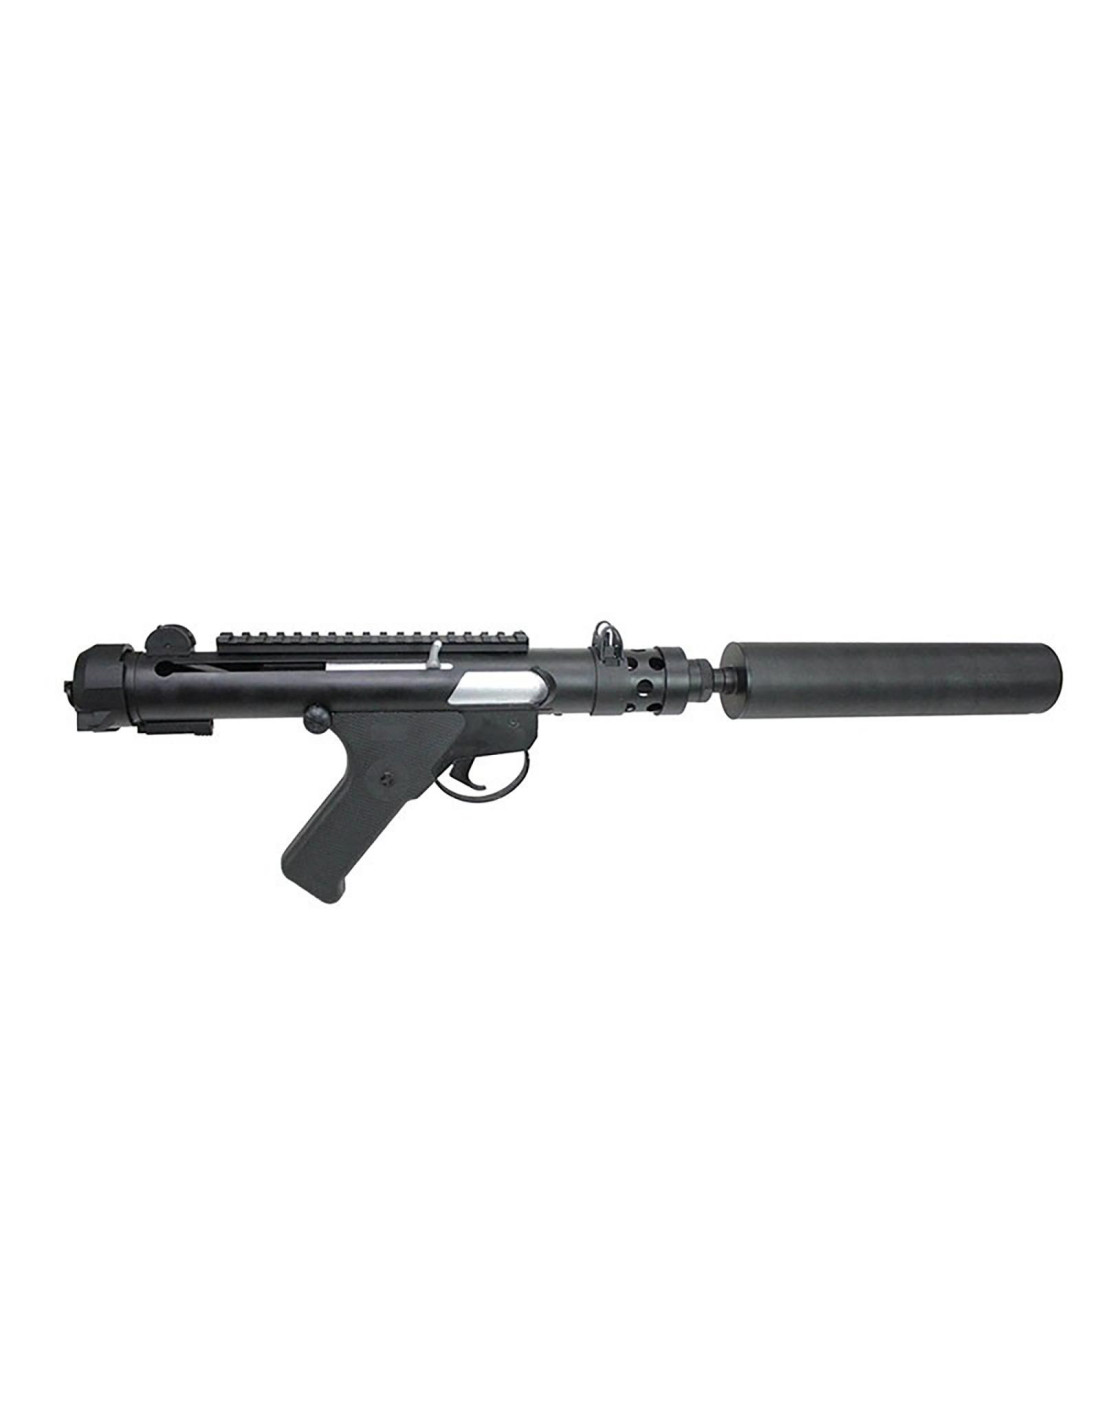 Replica Airsoft Electrica Paintball Fusil Airsoft Automatic